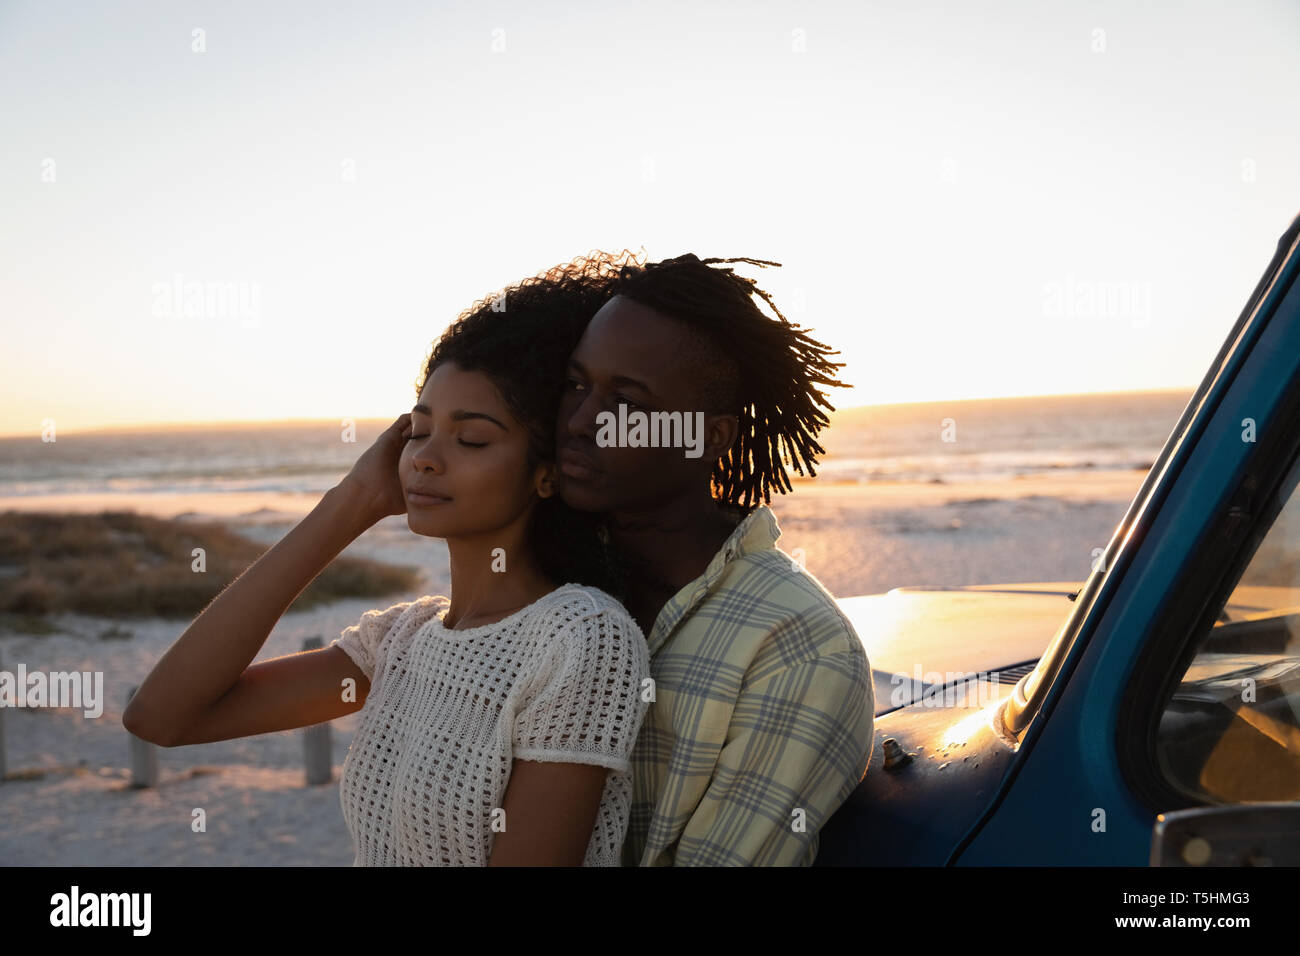 Romantic couple leaning at car on beach Stock Photo